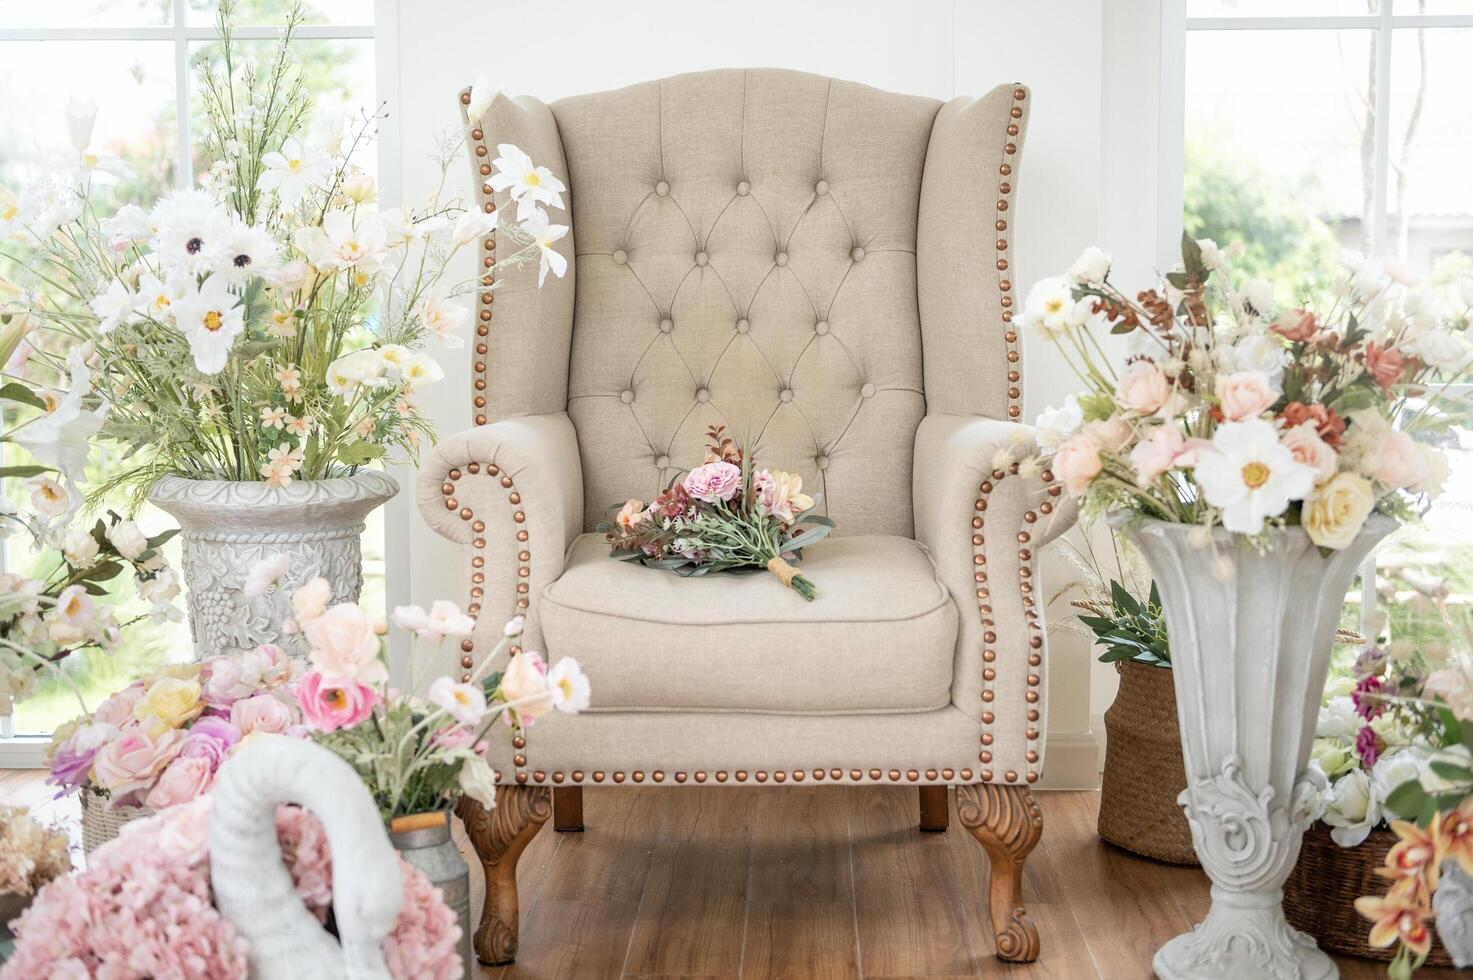 Interior of armchair decorated with Beautiful flowers for wedding ceremony. photo